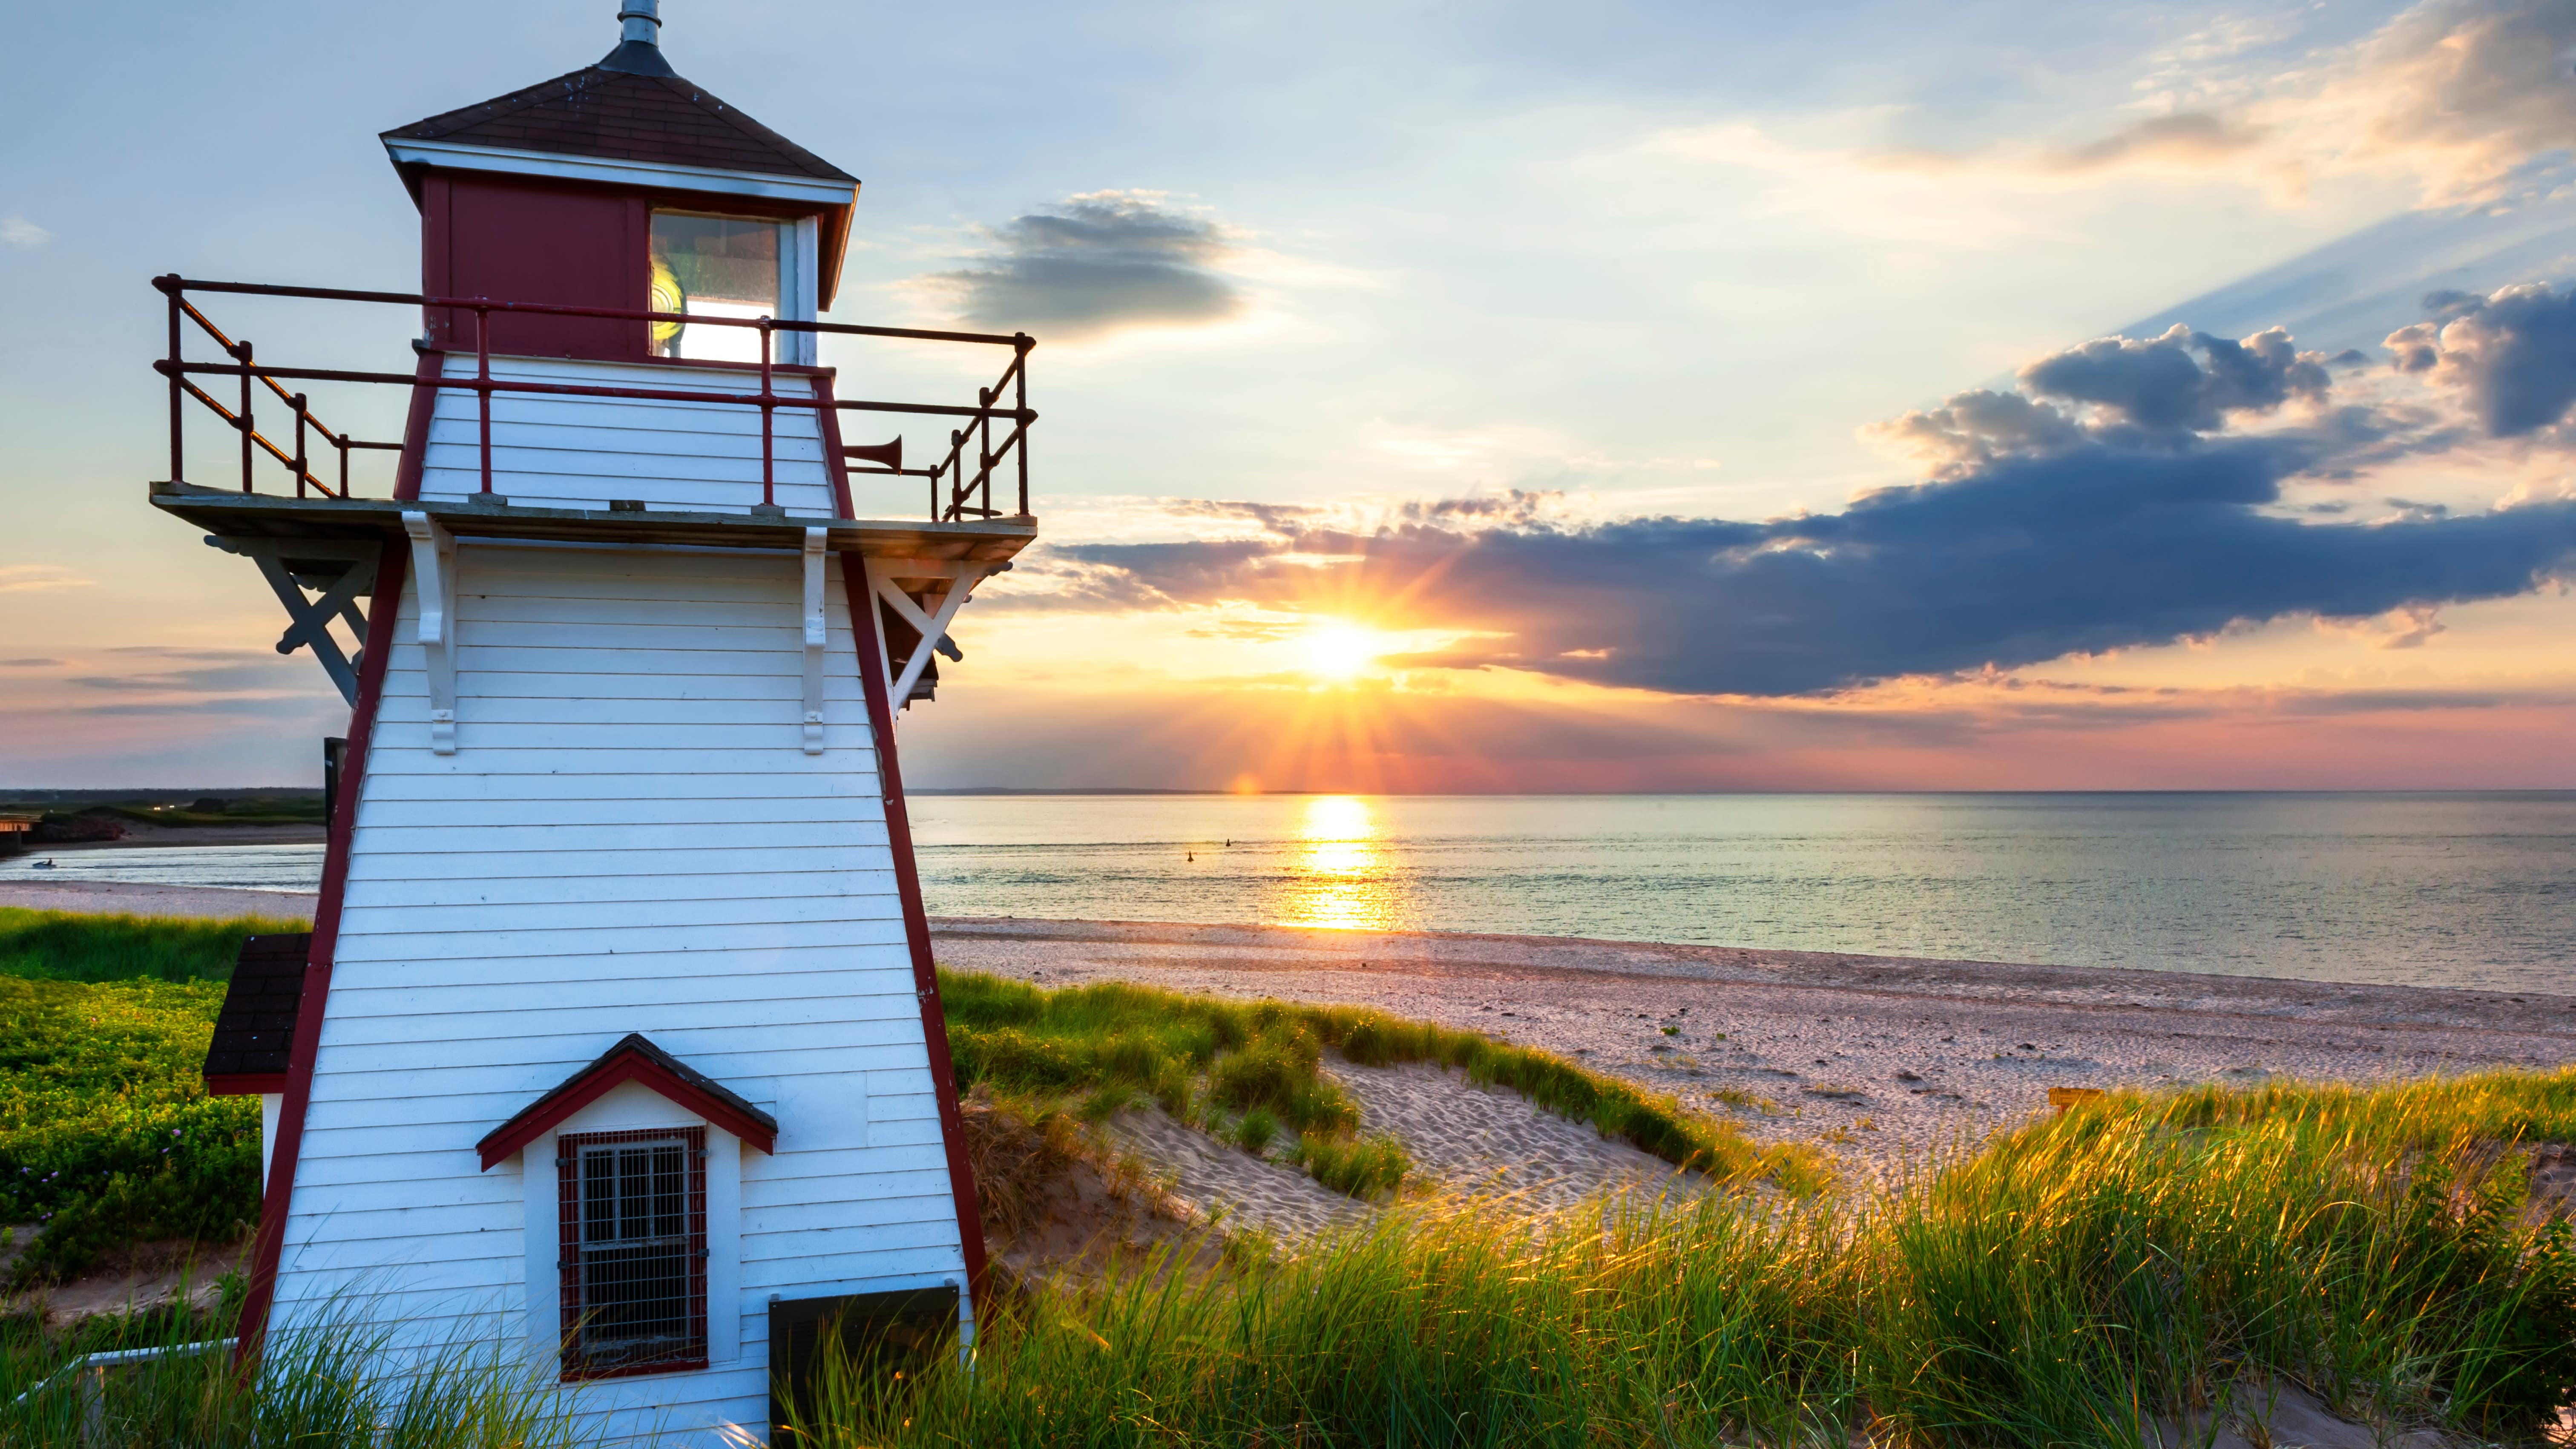 Get inspiration for your trip with PEI tourism